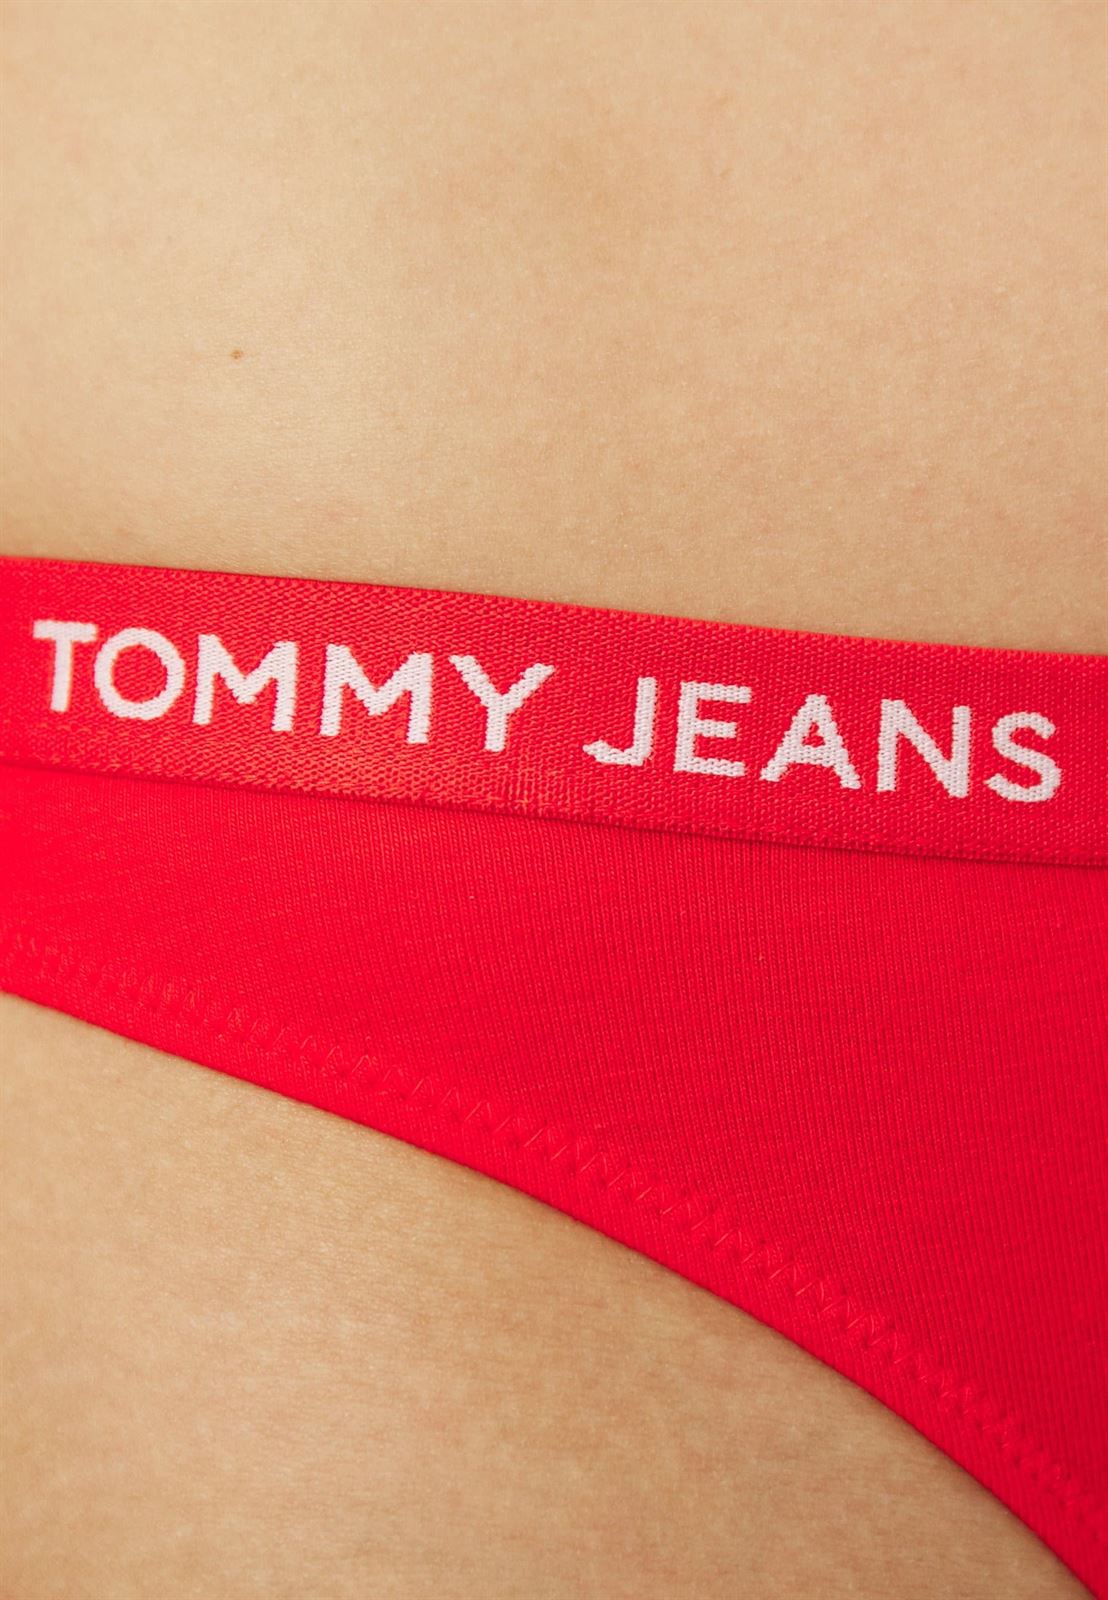 Pack 3 tangas Tommy Jeans UWOUW05008 0V2 hot heat/white/Mod Blue - Imagen 2